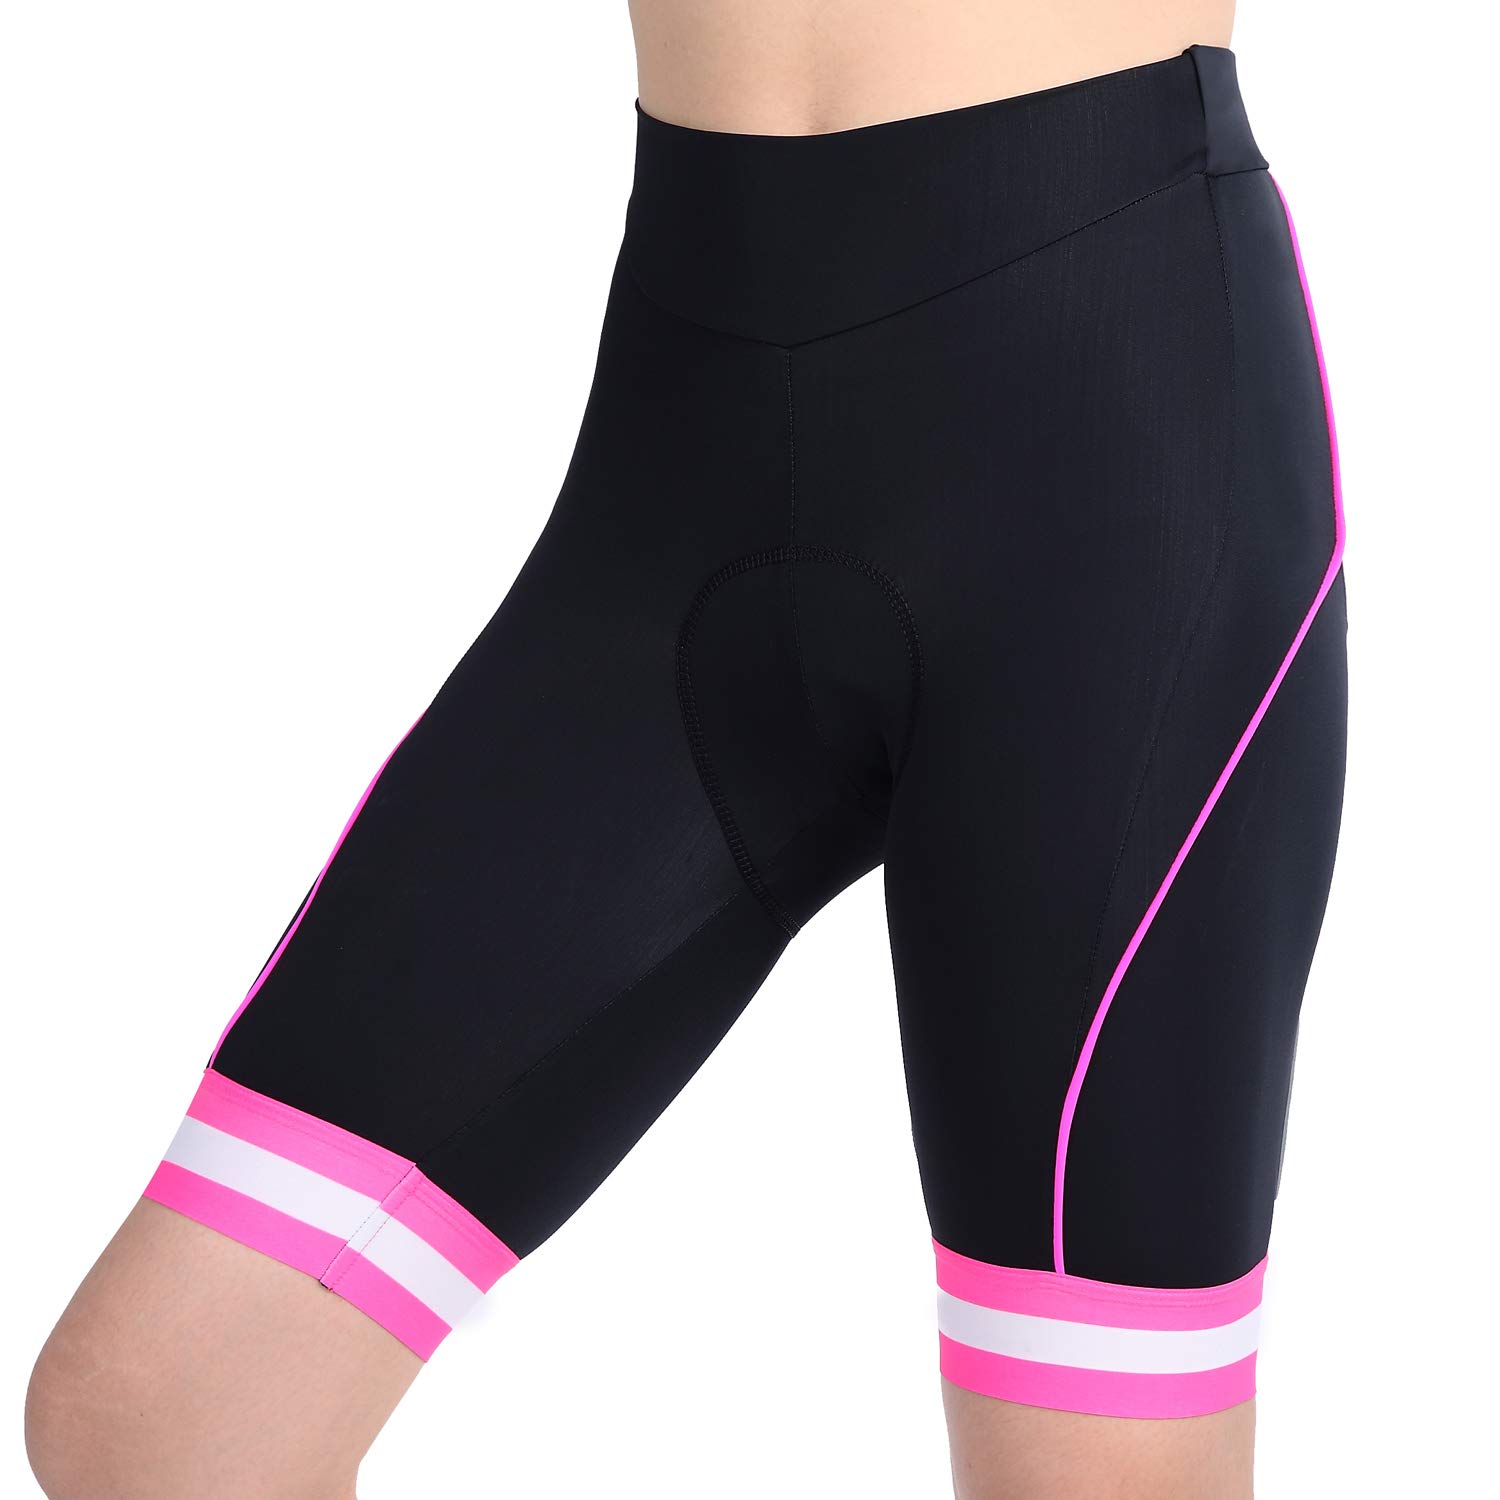 Top 10 Best Bike Shorts for Women Top Value Reviews